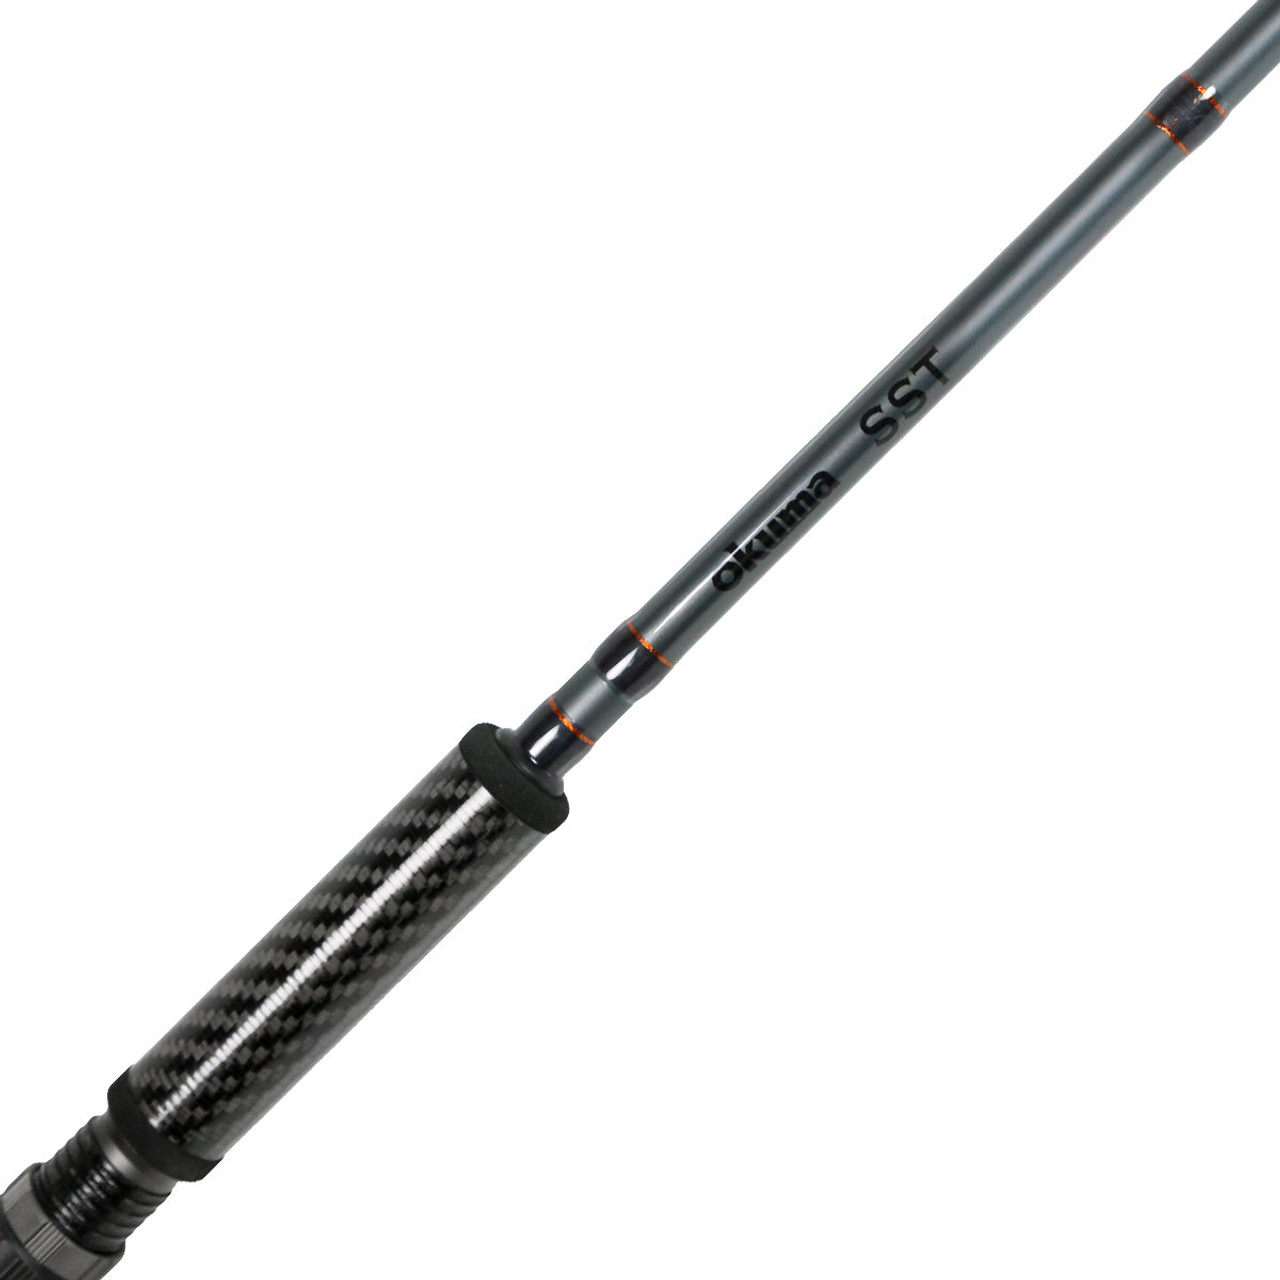 Okuma SST New generation SST Fishing rod with carbon grips ML 6-12LB 10'6  2PC SPIN CP-5 - SteelheadStuff Float and Fly Gear